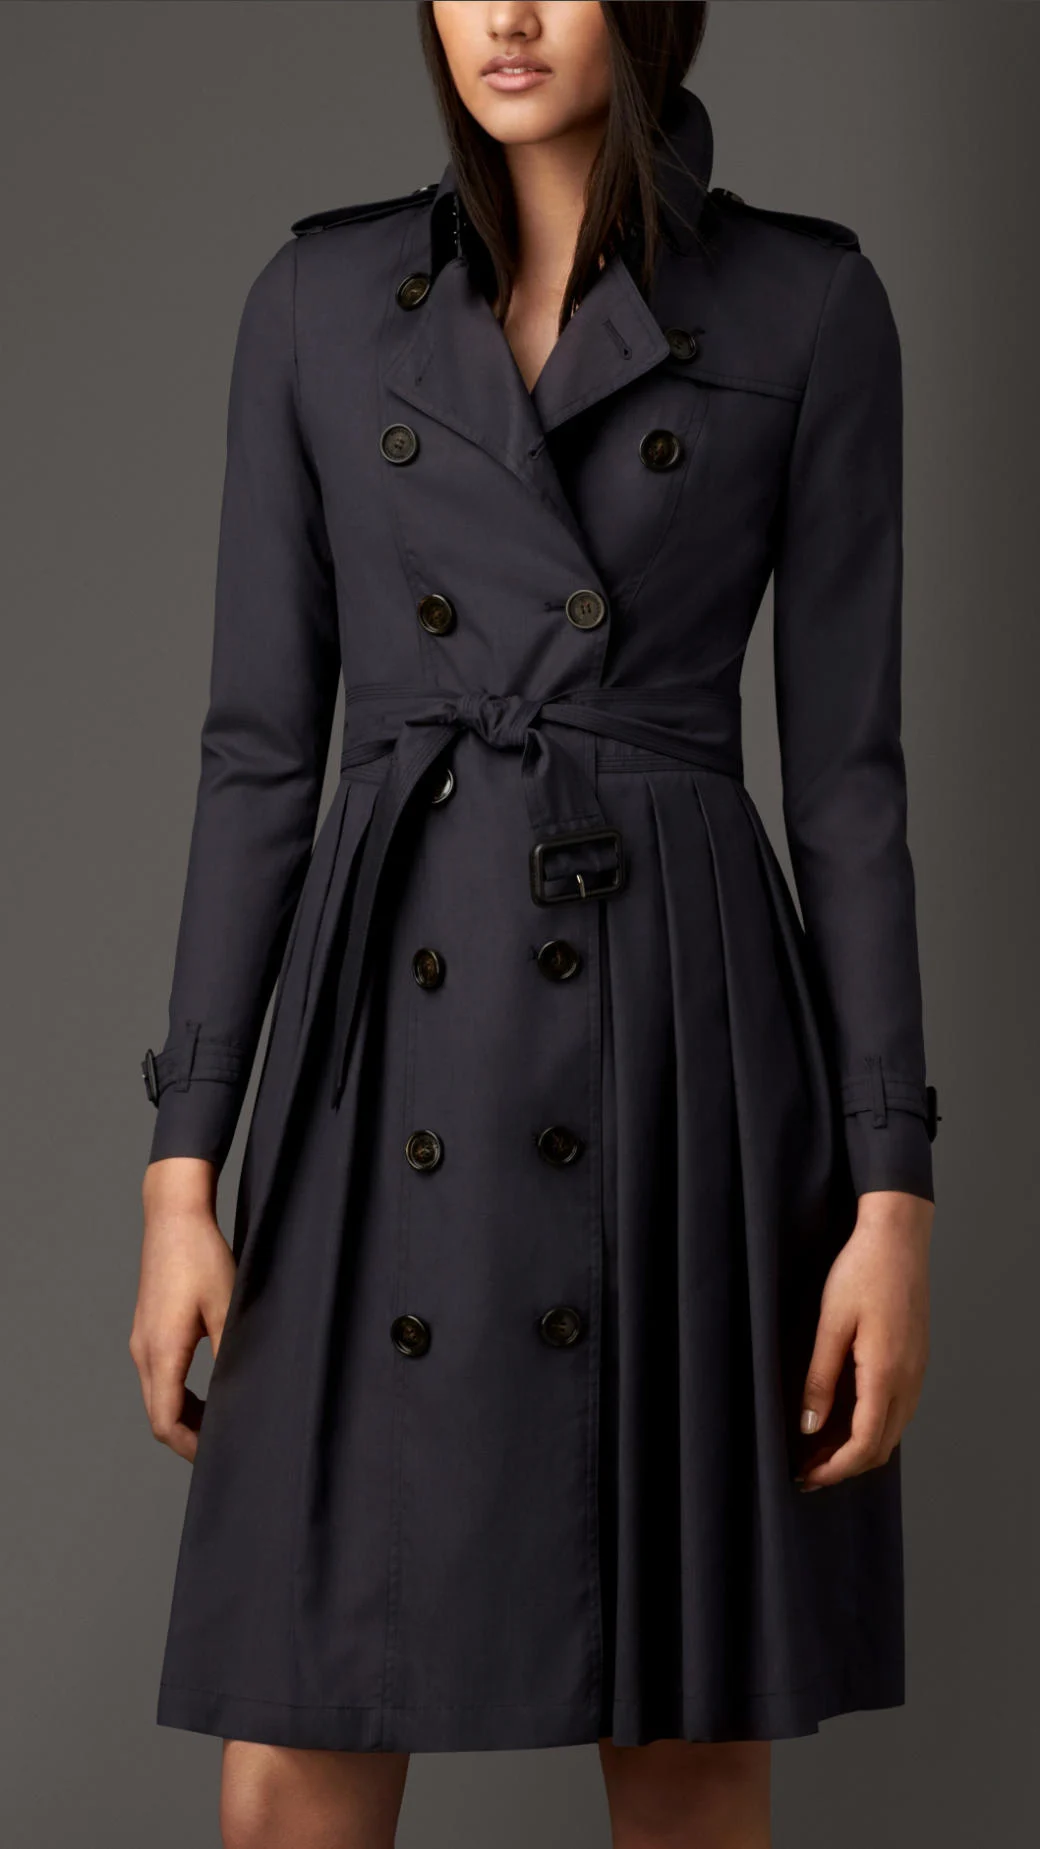 Burberry Trench Coats: Timeless Elegance, British Heritage, and Iconic Outerwear